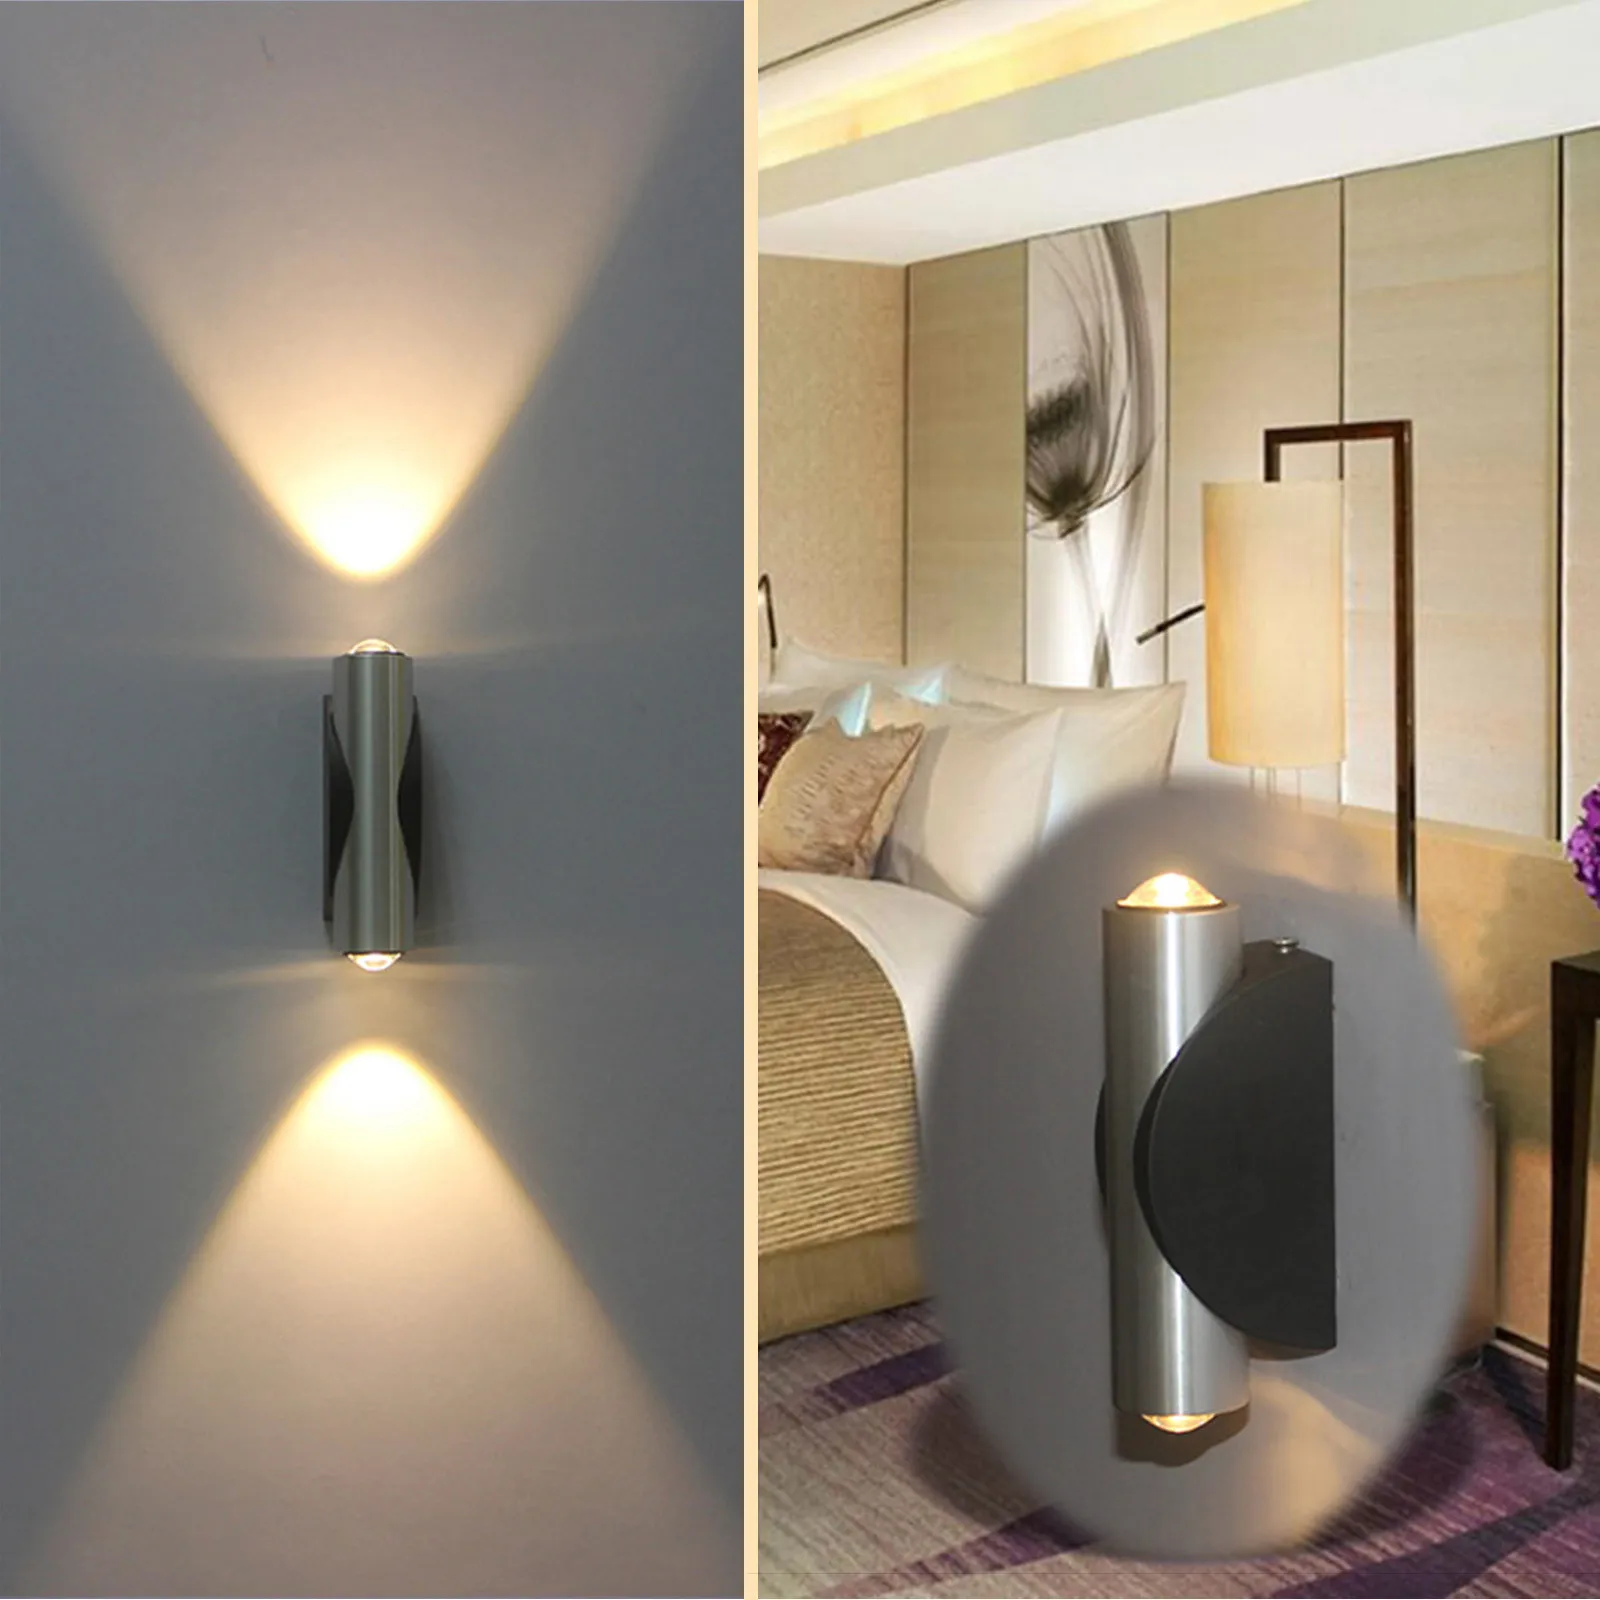 Details about   Double-headed LED Wall Lamp Home Sconce Bar Porch Wall Decor Ceiling Light Blue 